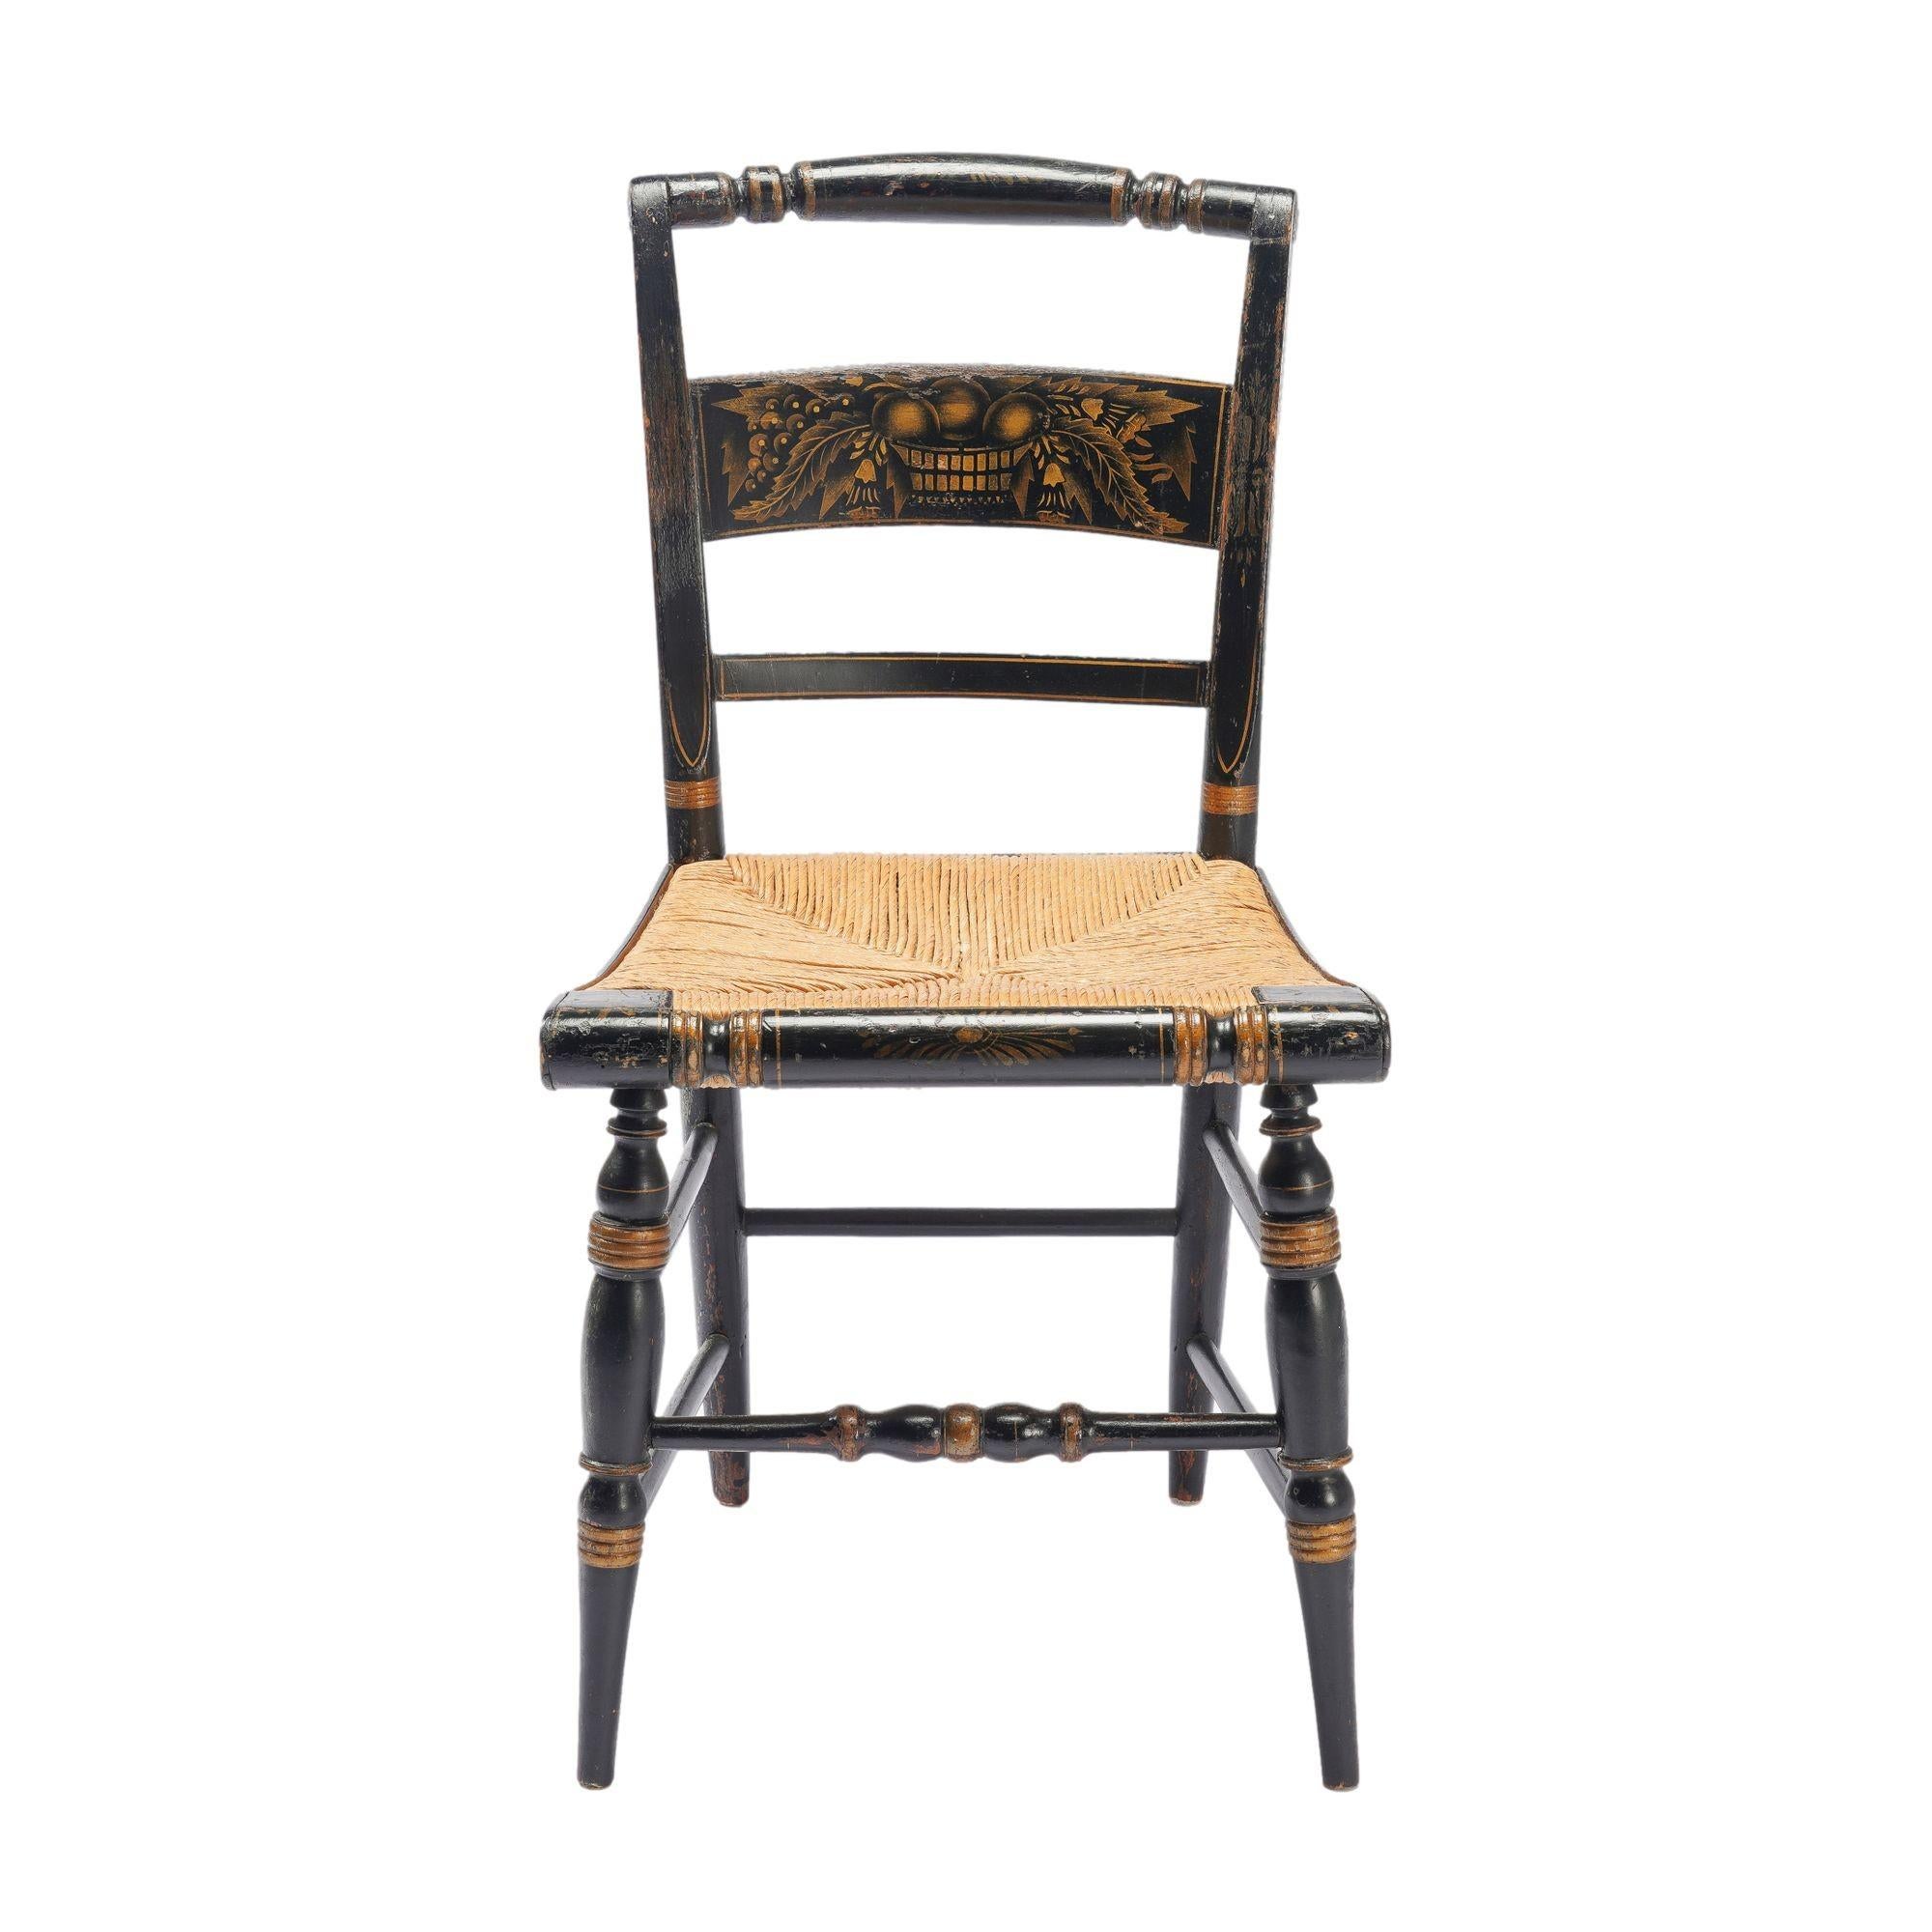 Set of 4 classic Hitchcock style side chairs of painted and stencil decorated mixed woods, fitted with handwoven rush seats. The turned and bowed crest rails are morticed to the turned and splayed upper leg posts. Beneath the crest rail is a stencil